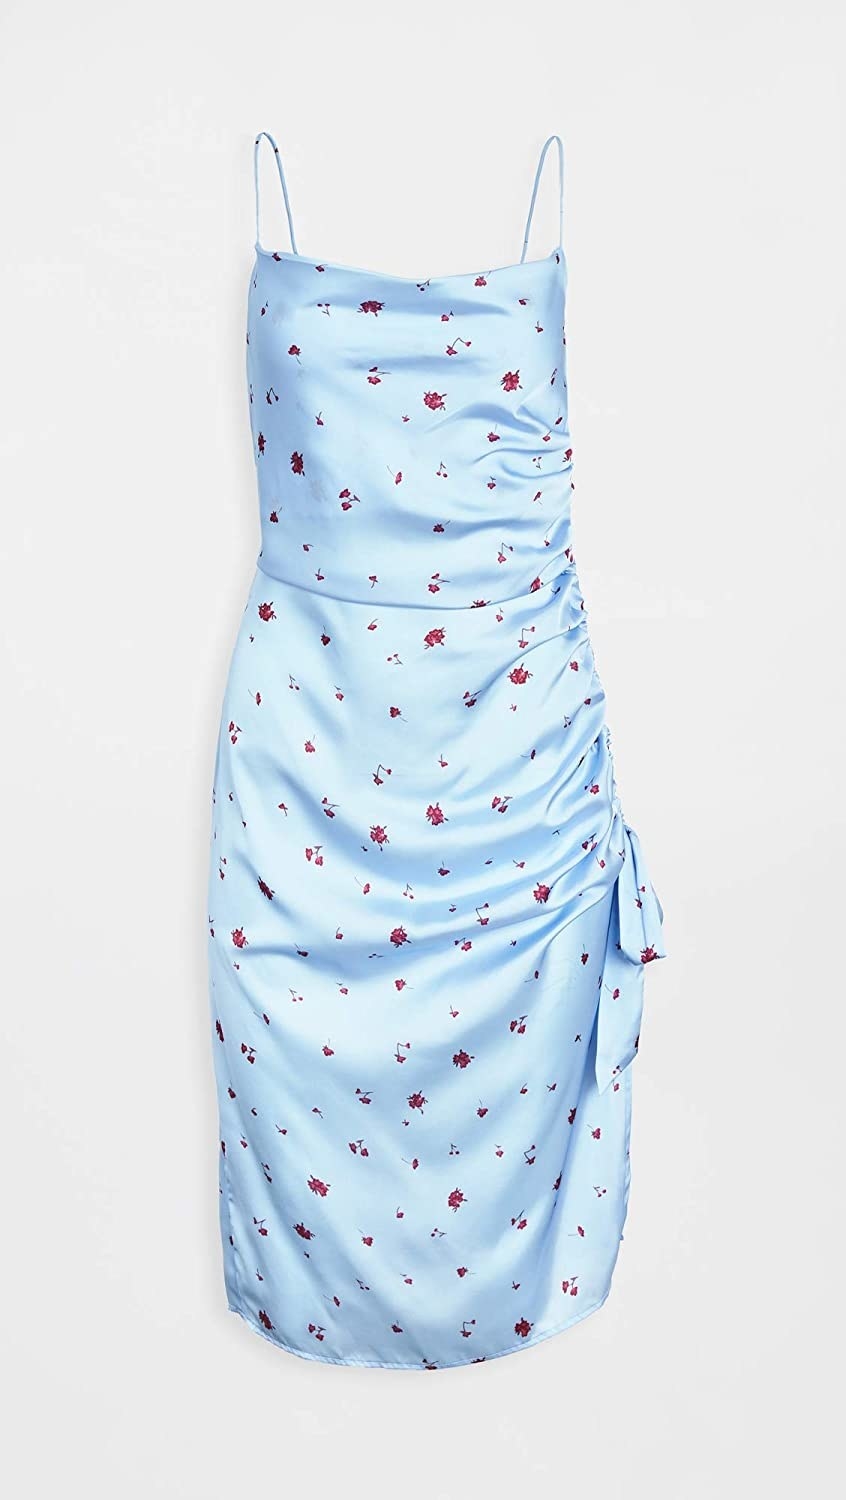 The dress in blue with small red flowers on it